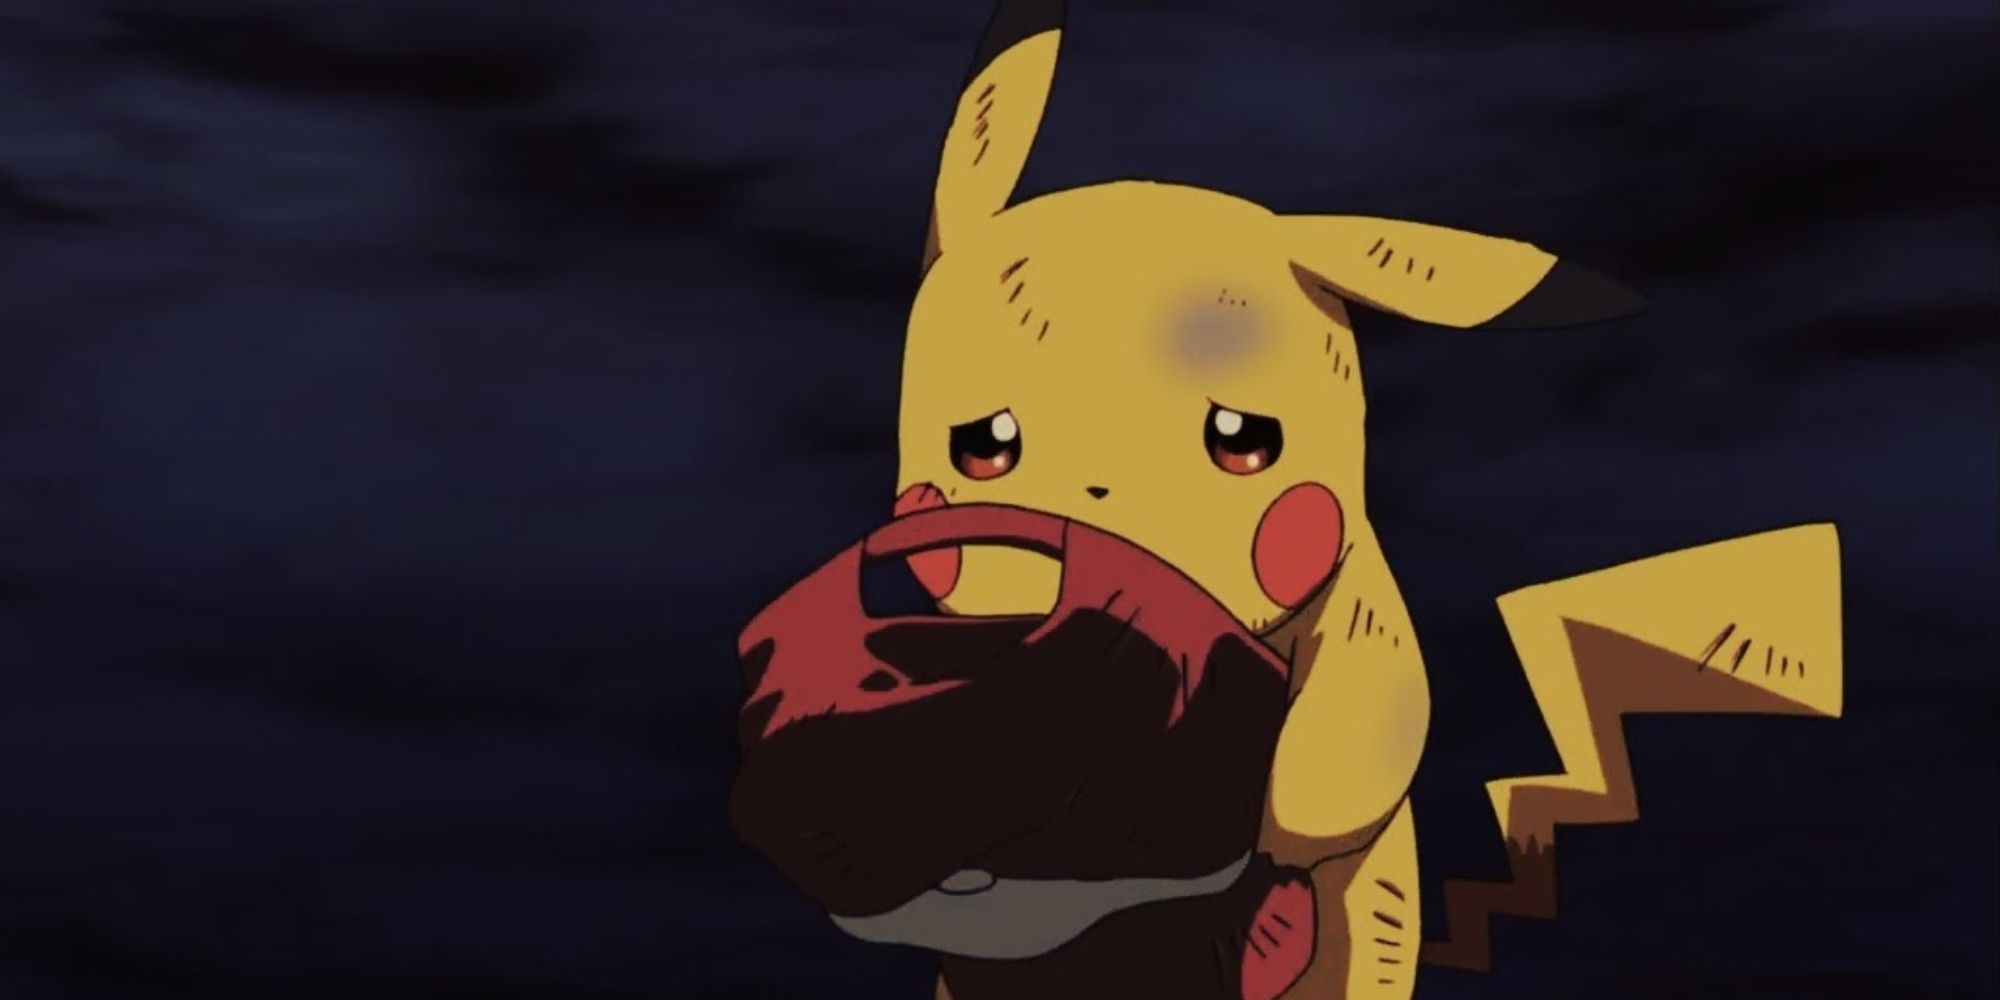 Pokémon retired Ash and Pikachu at the perfect moment - Polygon